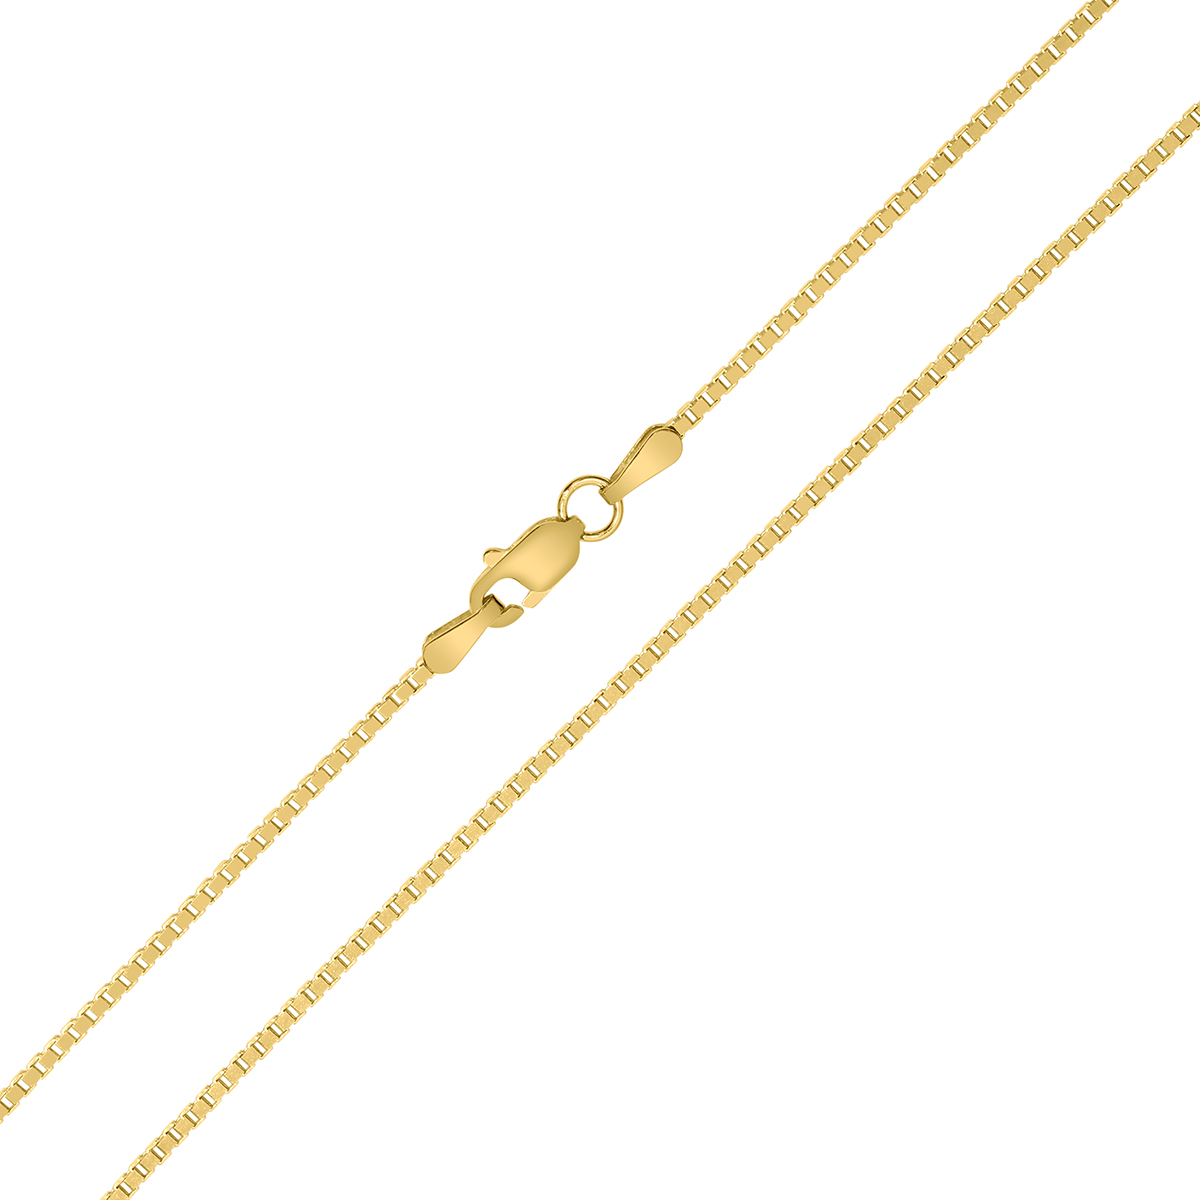 14K Yellow Gold 1.1mm Shiny Square Link Classic Box Chain with Lobster Clasp - 18 Inch